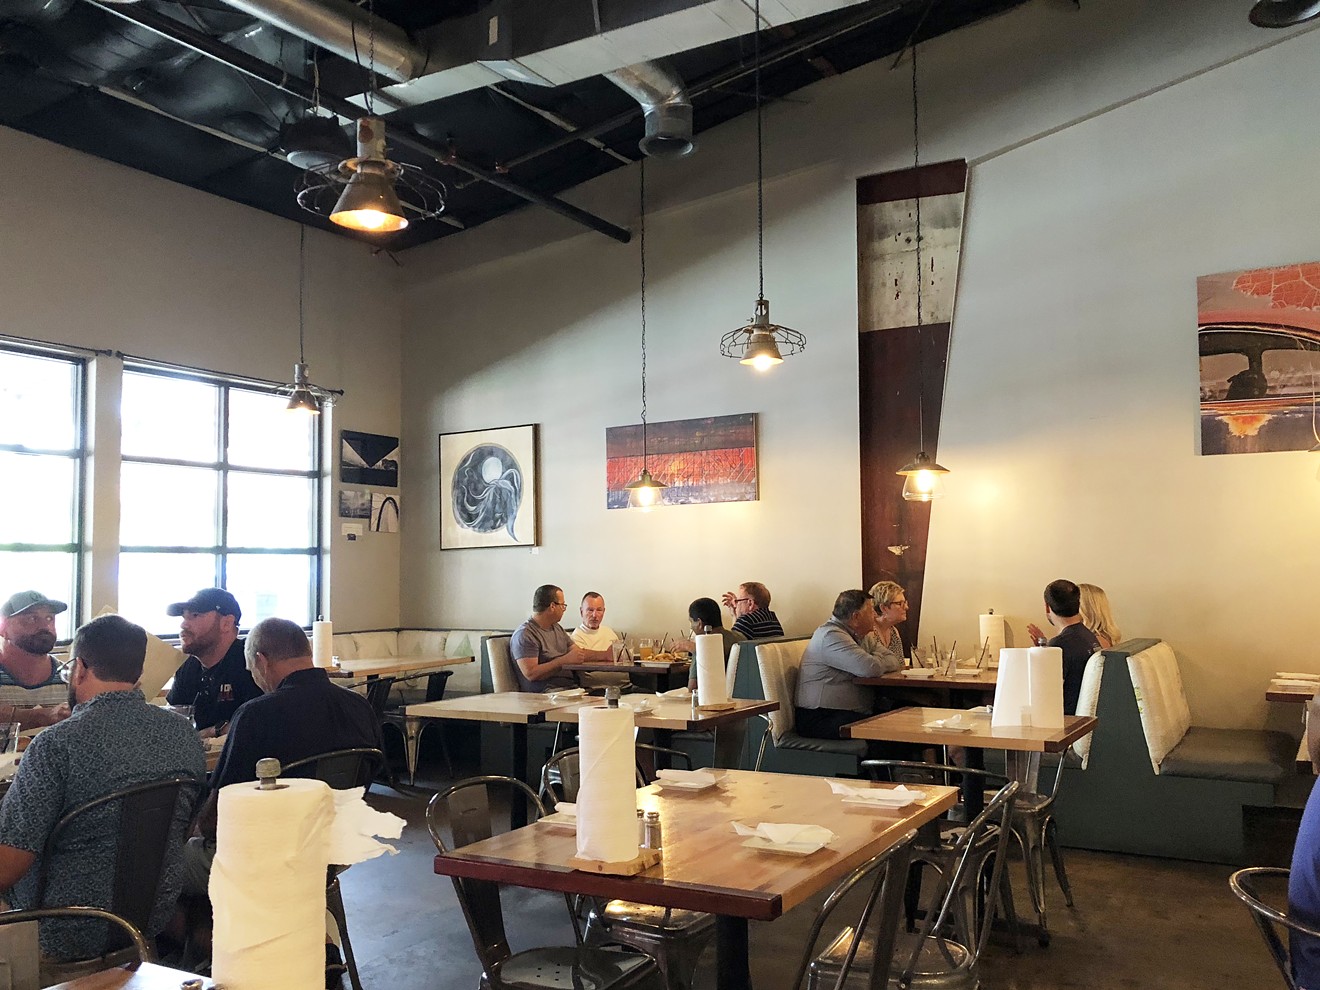 LUCK in Trinity Groves serves brunch from 11 a.m. to 4 p.m. every Sunday.